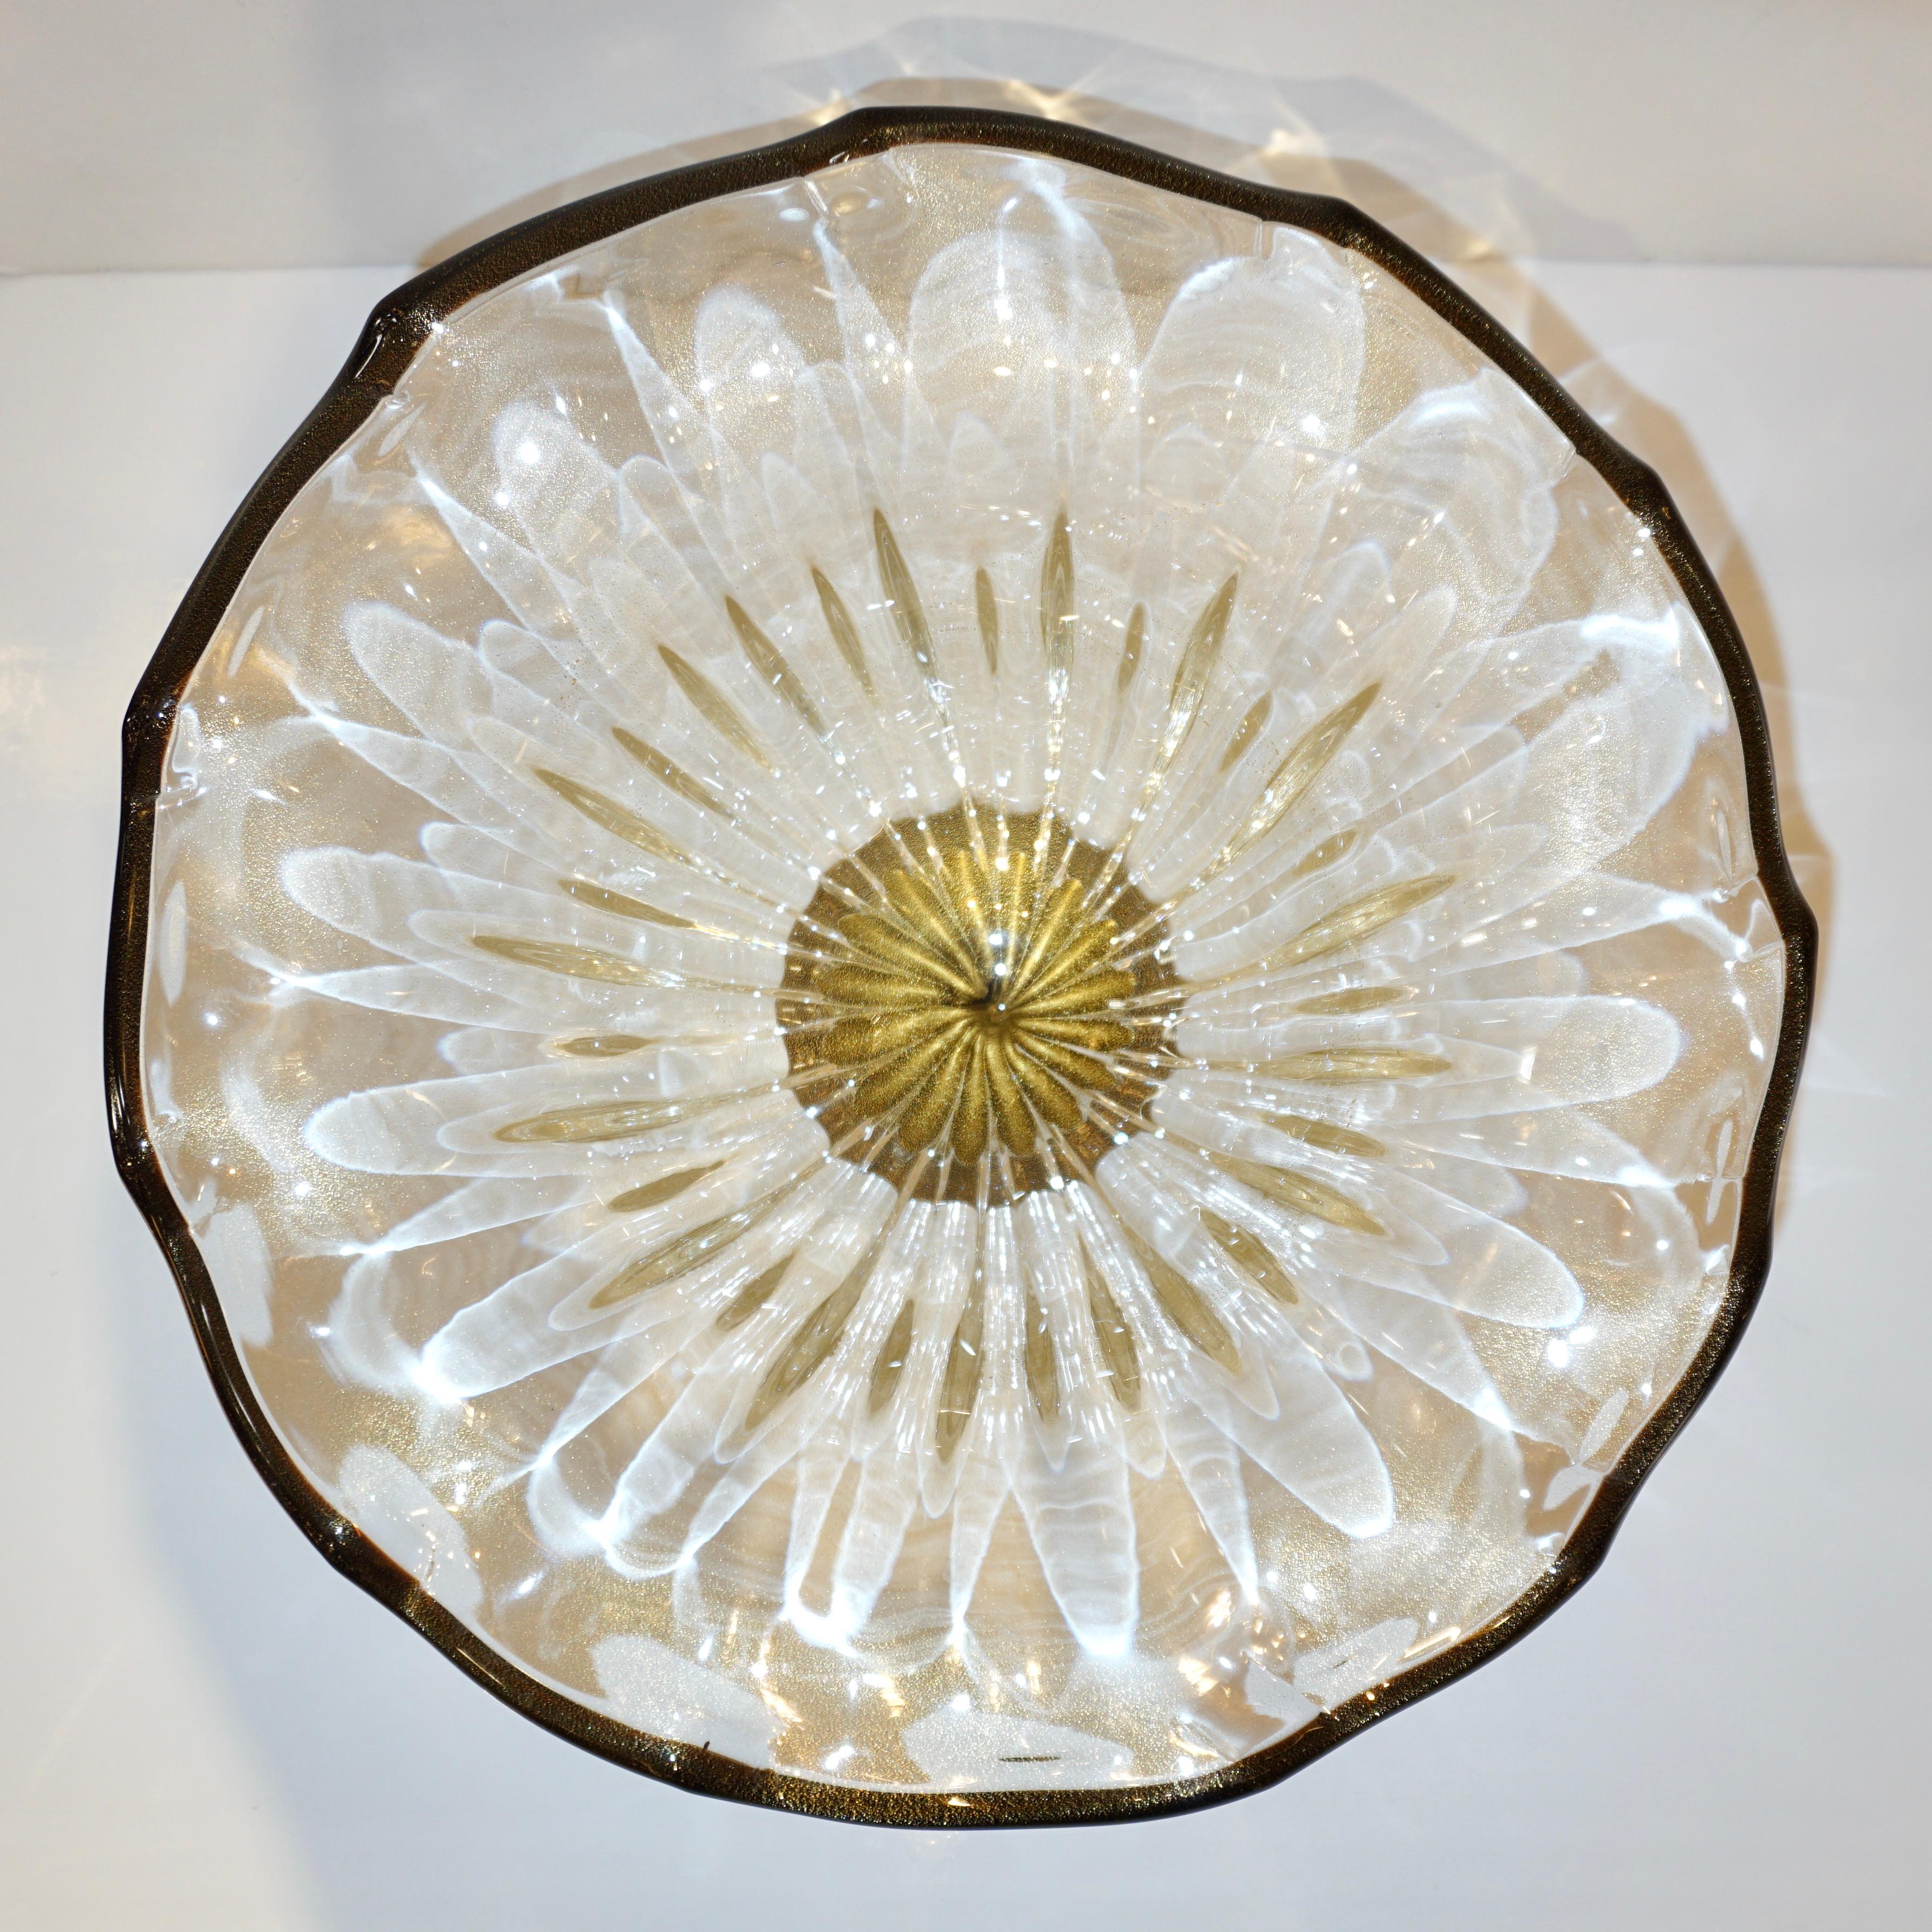 Organic Modern Italian Gold Dust Crystal Murano Glass Scalloped Centerpiece/Bowl with Black Rim For Sale